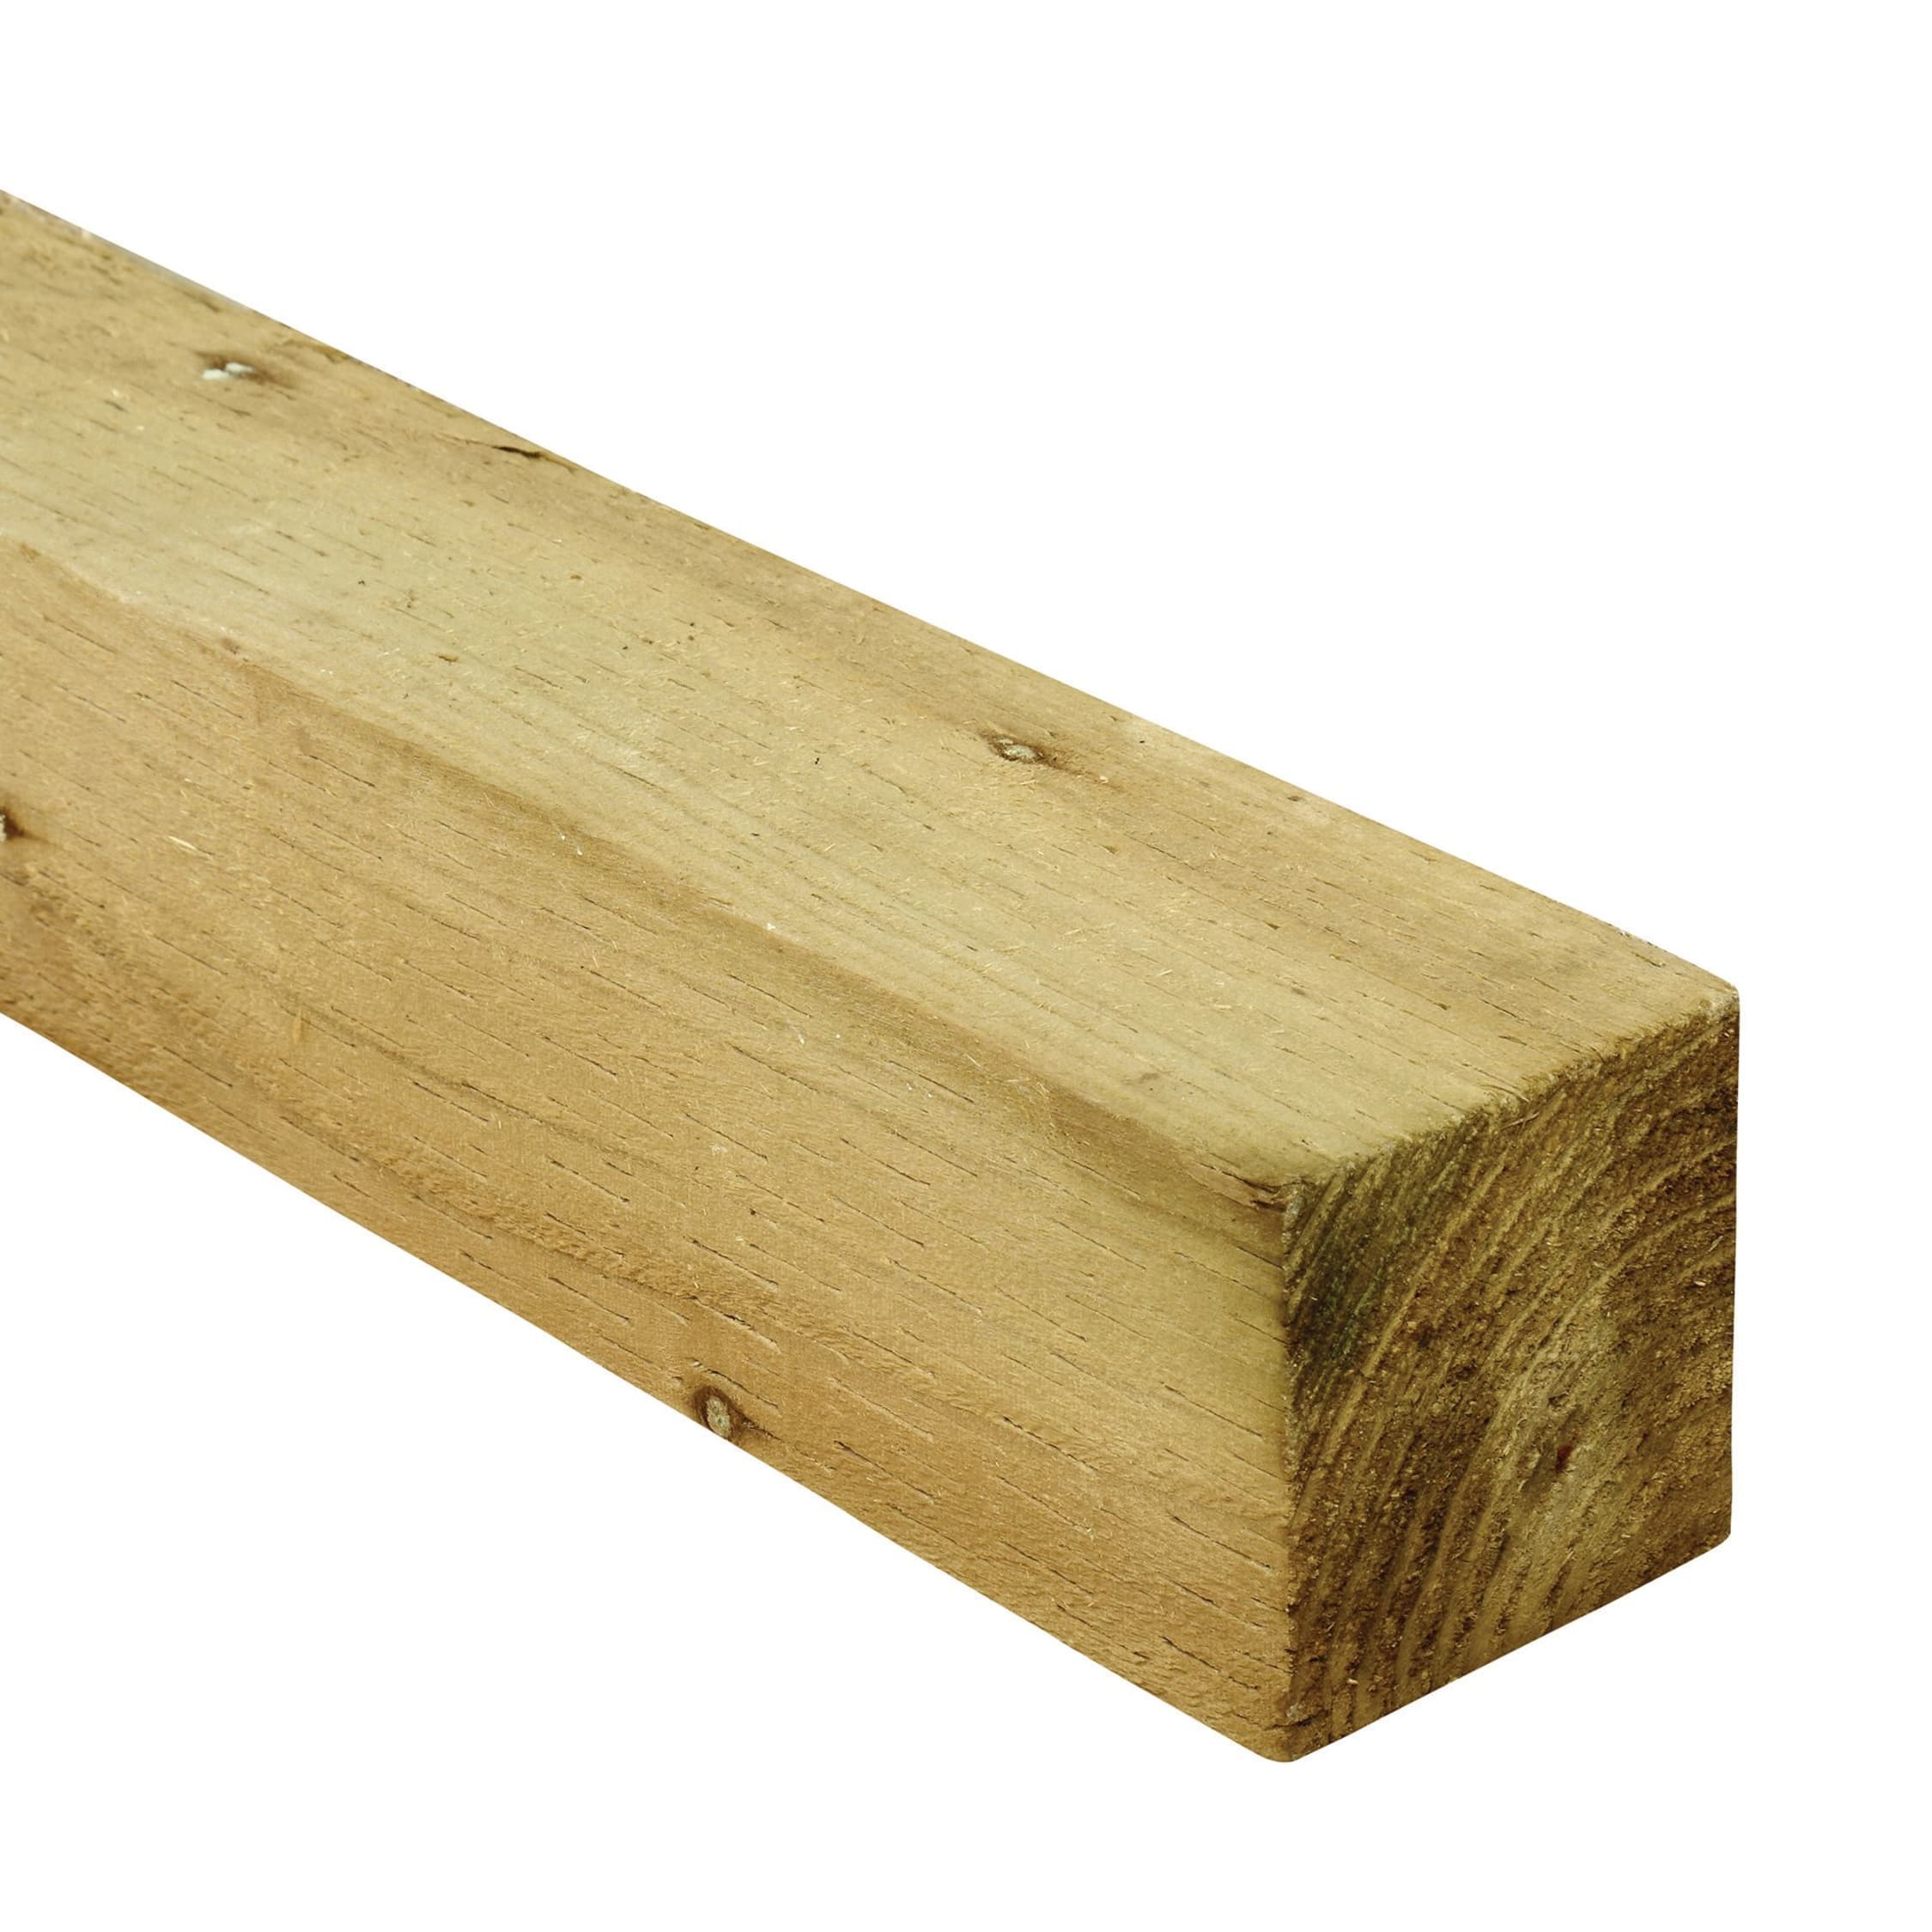 1 LENGTH INC DELIVERY 8FT 6X6 TIMBER FENCE POST GREEN TREATED 2.4M 